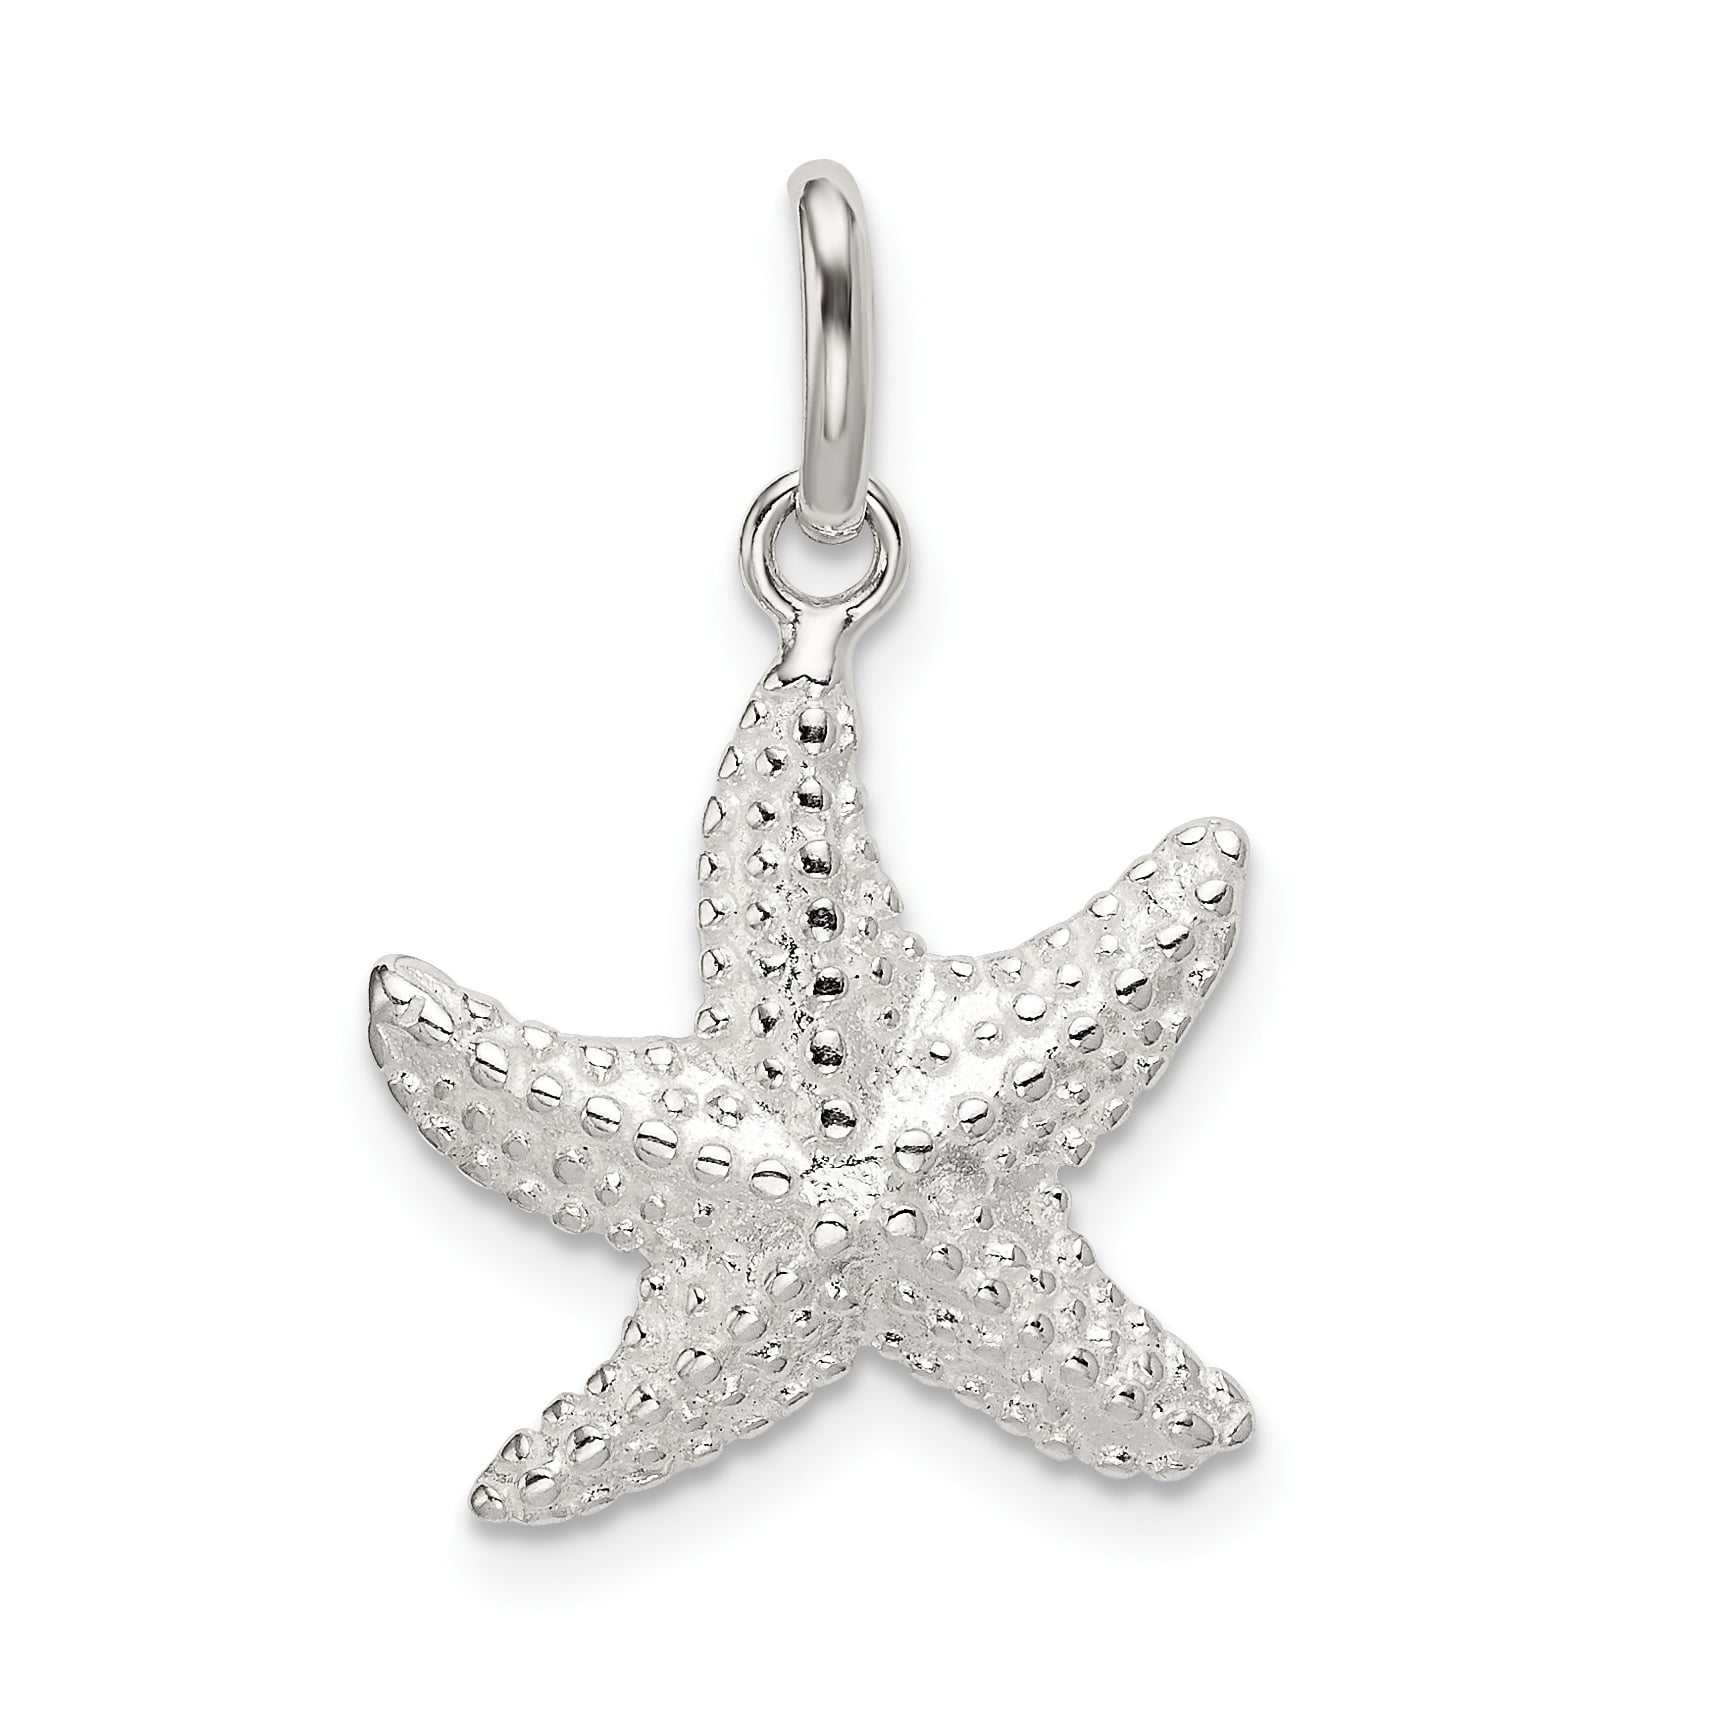 FASHIONS FOREVER® 925 Sterling Silver Starfish Leverback Earrings Handmade In UK